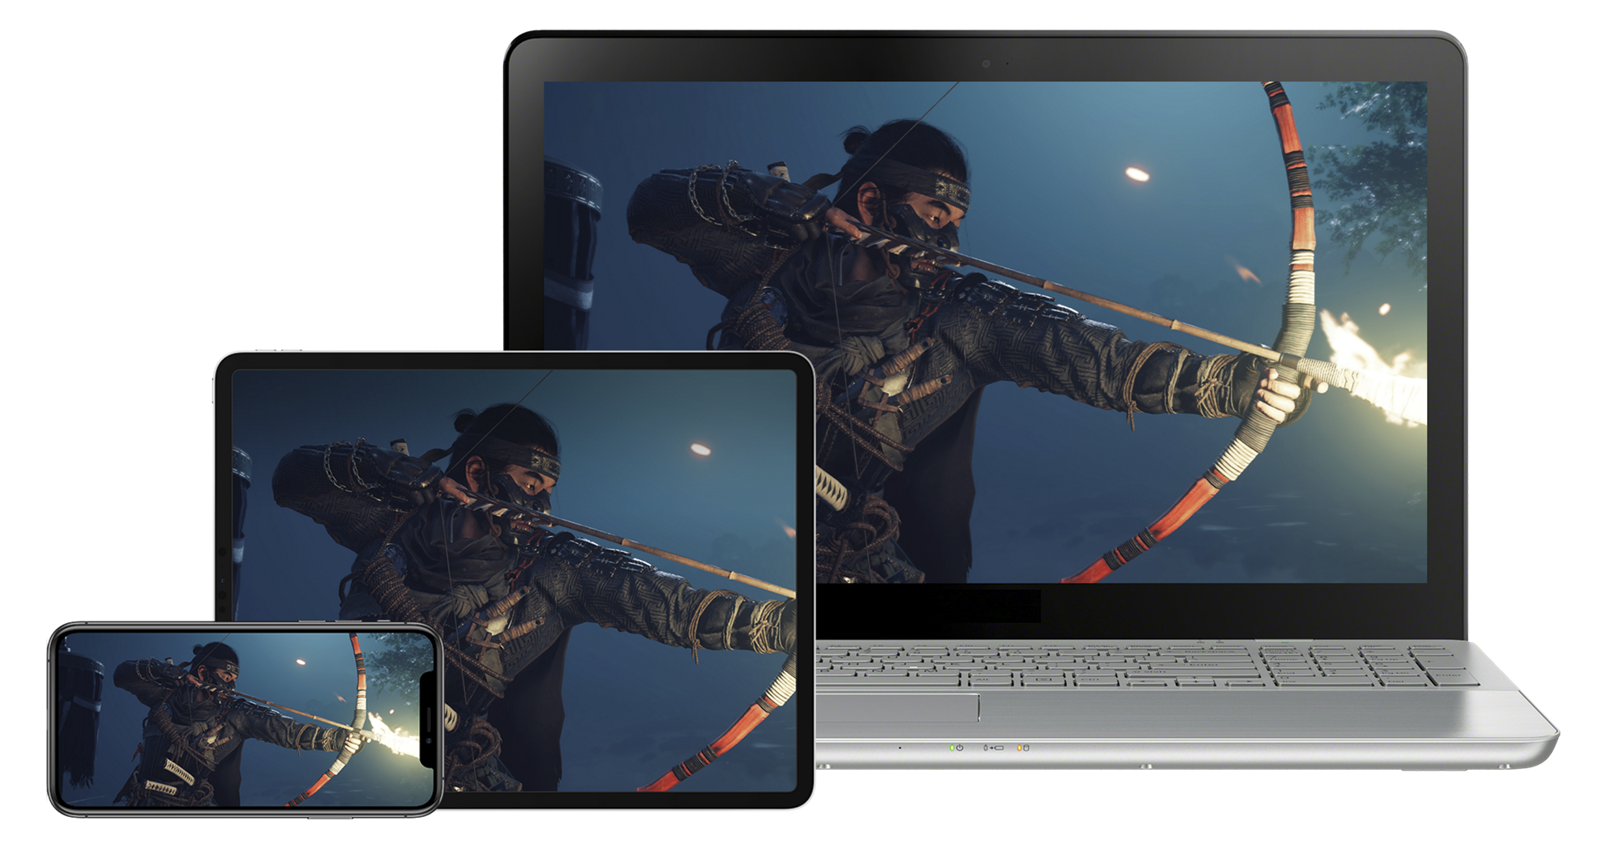 Apps for Macbook /PS4 Remote Play: